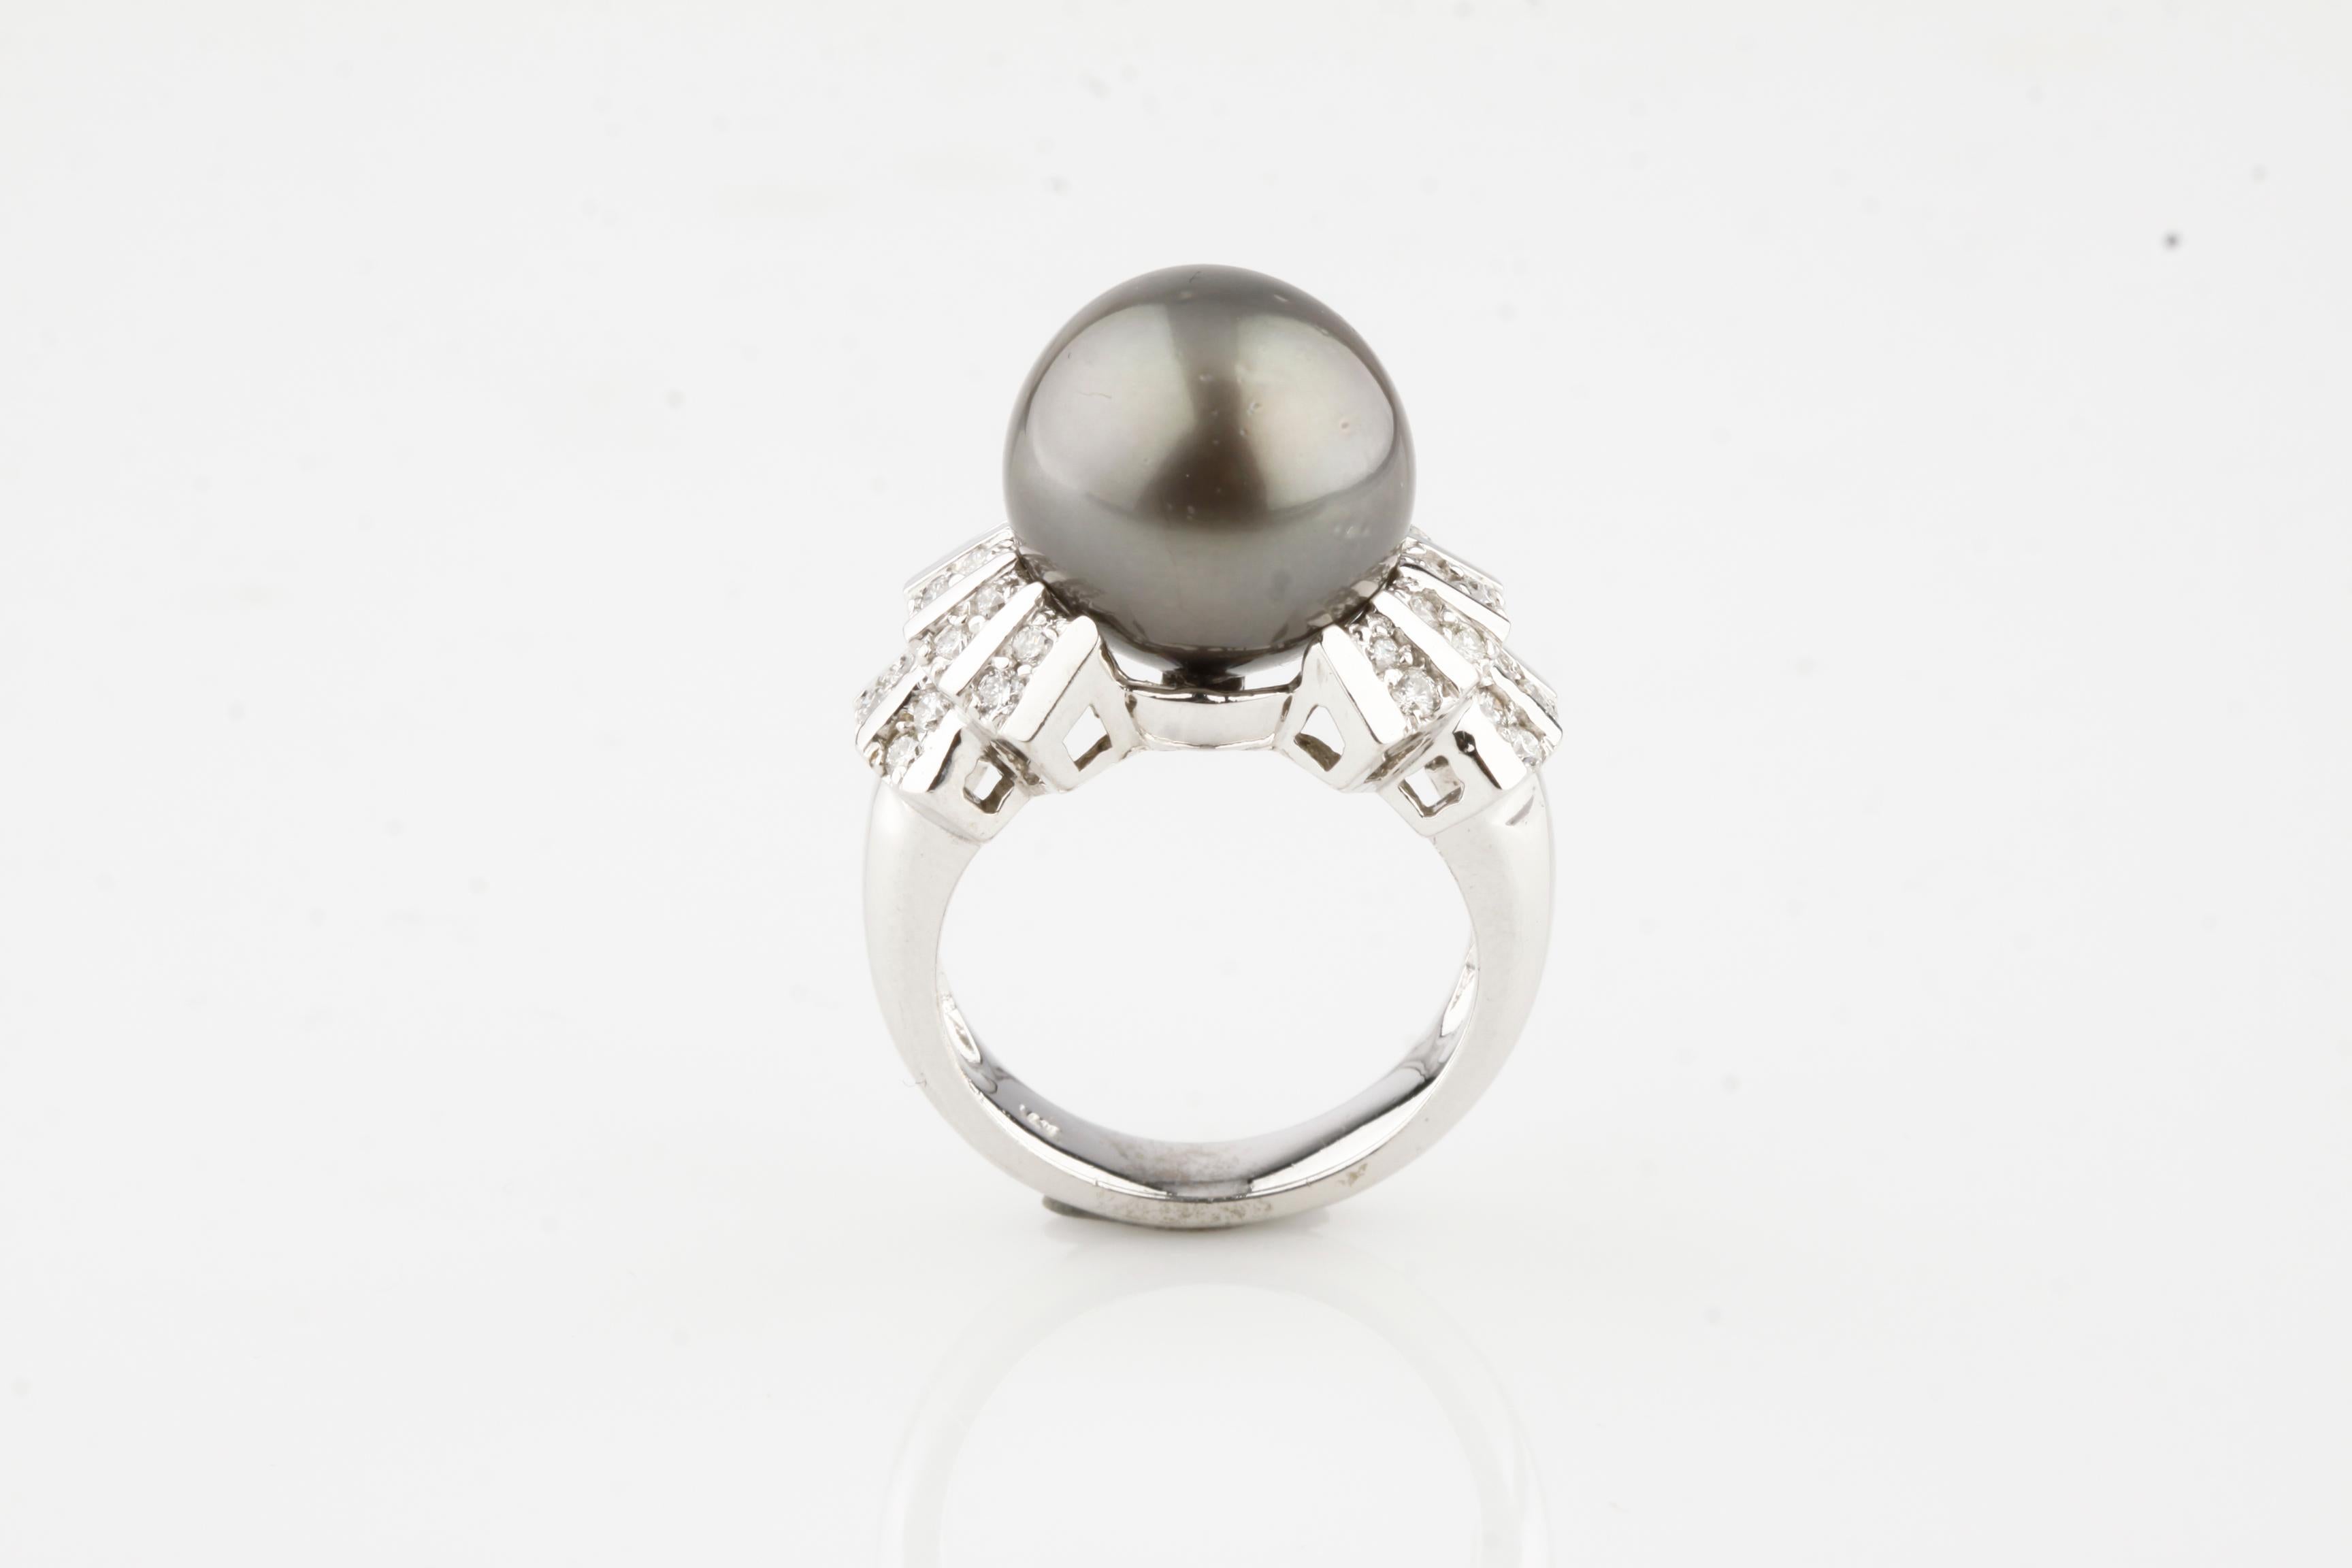 Gorgeous Black Tahitian Pearl Solitiare Ring
Pearl Appx 13 - 14 mm in Diameter
Accented with Art Deco-Inspired Pave Set Diamond Double Skirts Around Ring
Size 7
Total Mass = 13.3 grams
Total Diamond Weight = 0.66 Ct
Average Color = G - H
Average